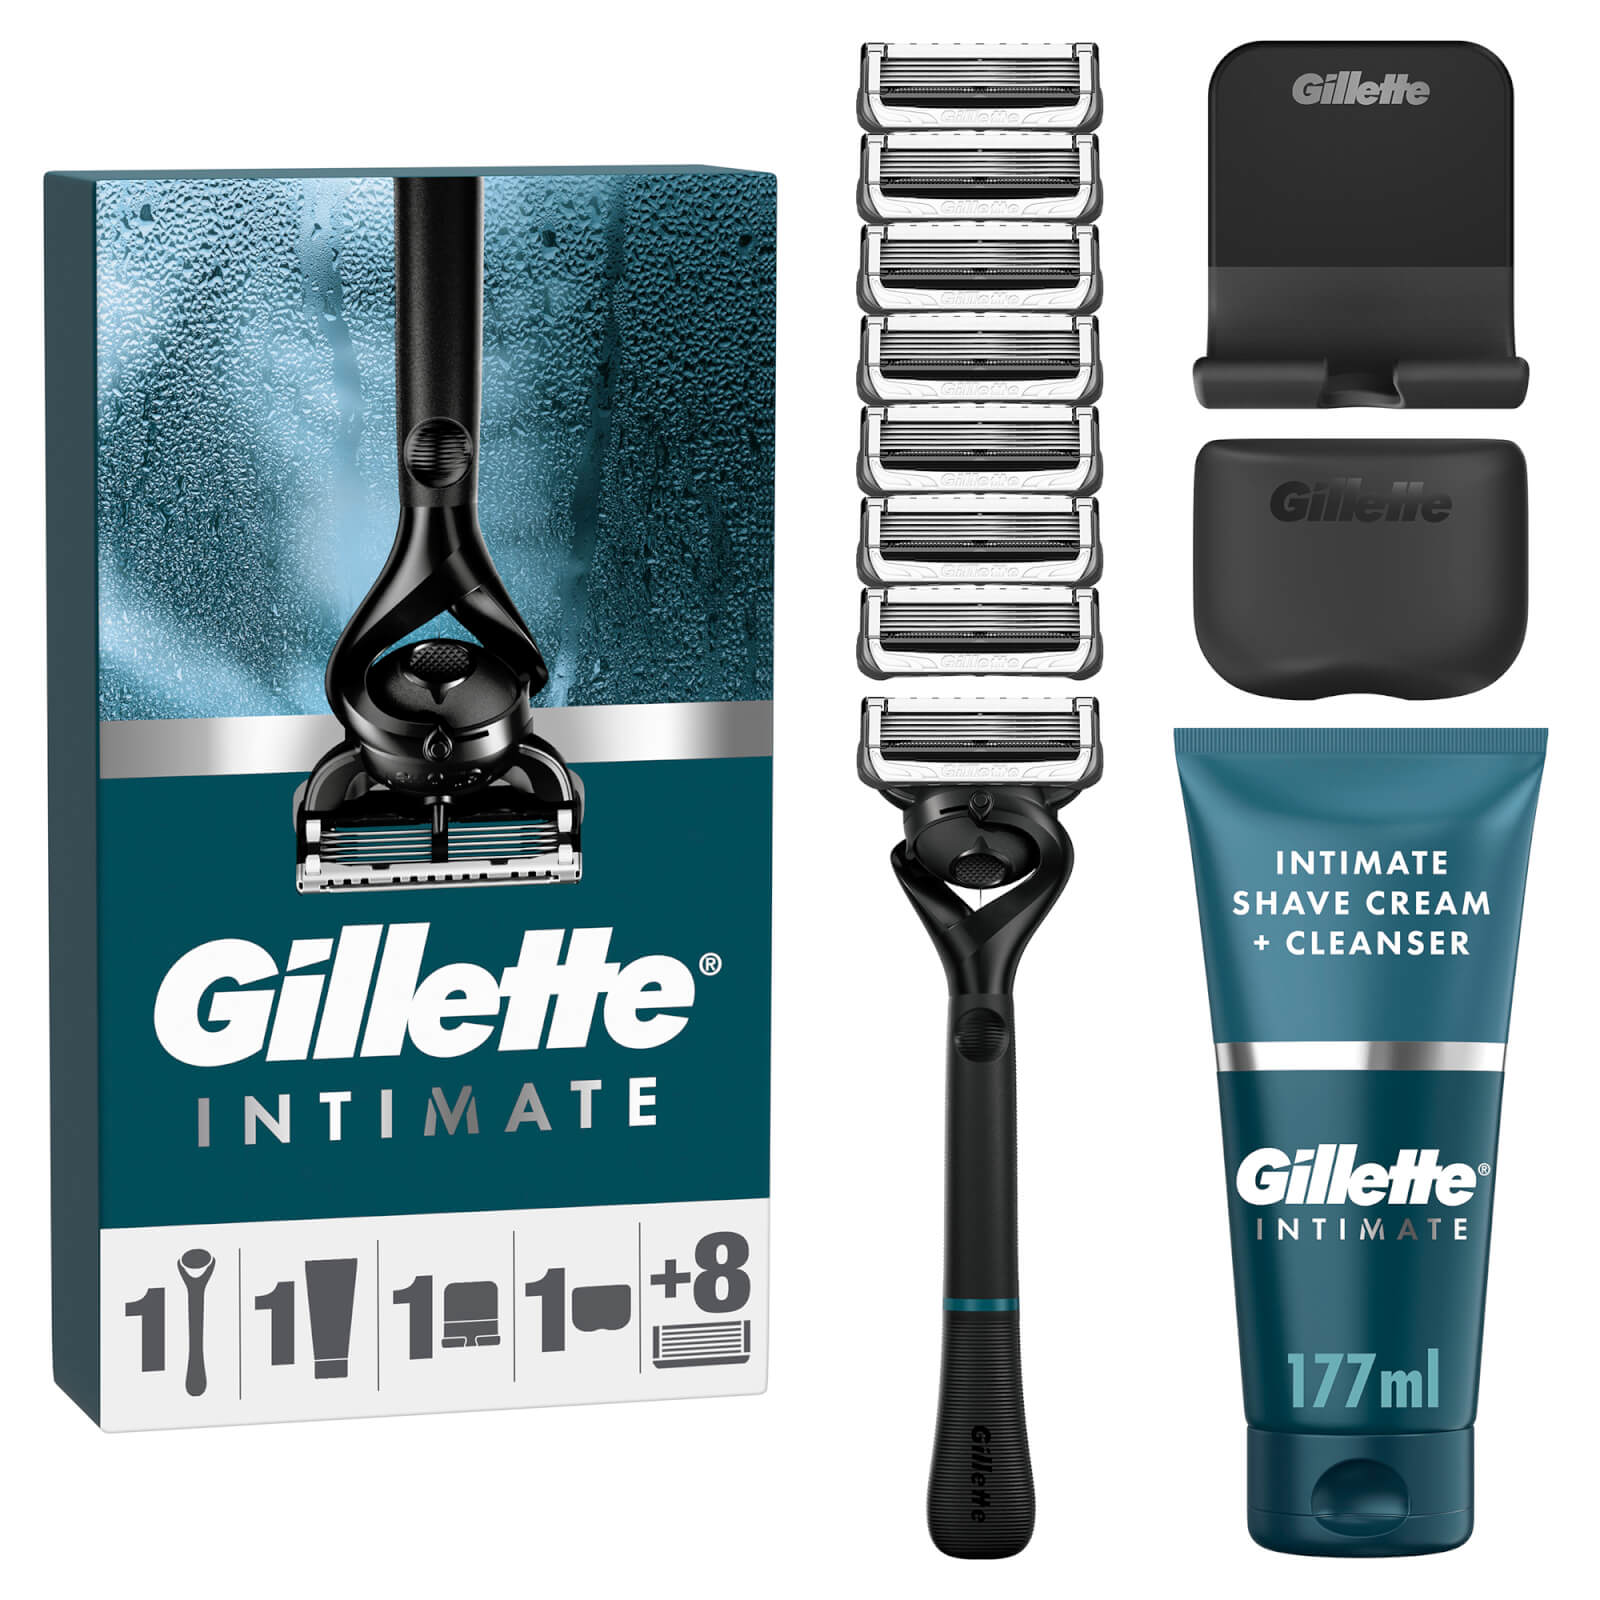 Gillette Intimate Regimen Pack - Pubic Hair and Skin Care Pack